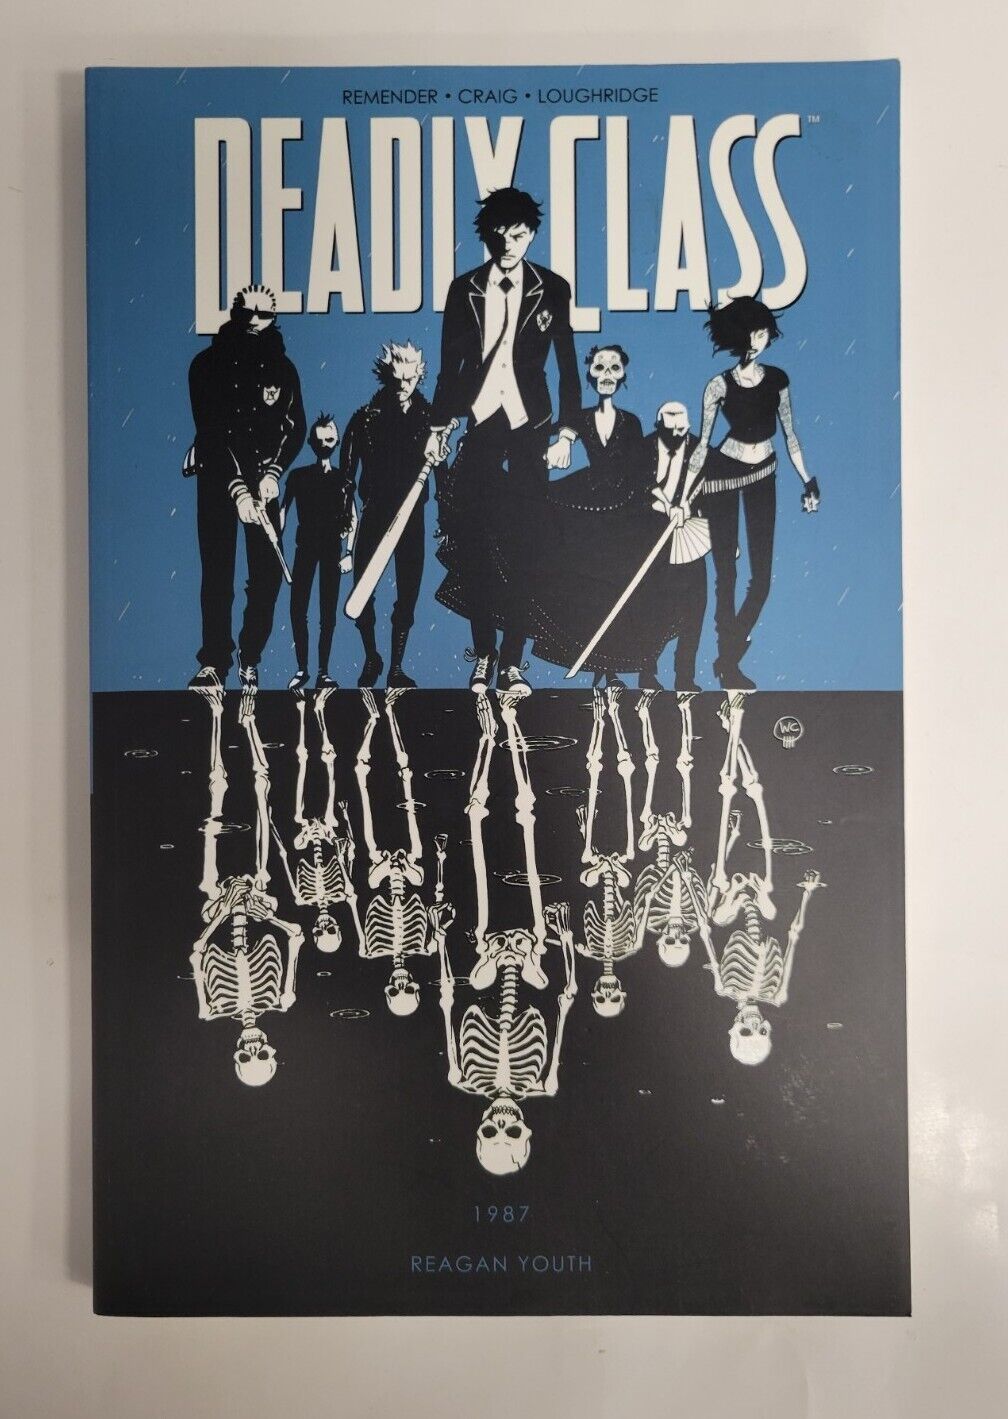 Deadly Class - 1987 REAGAN YOUTH VOLUME 1 - Image - Graphic Novel TPB